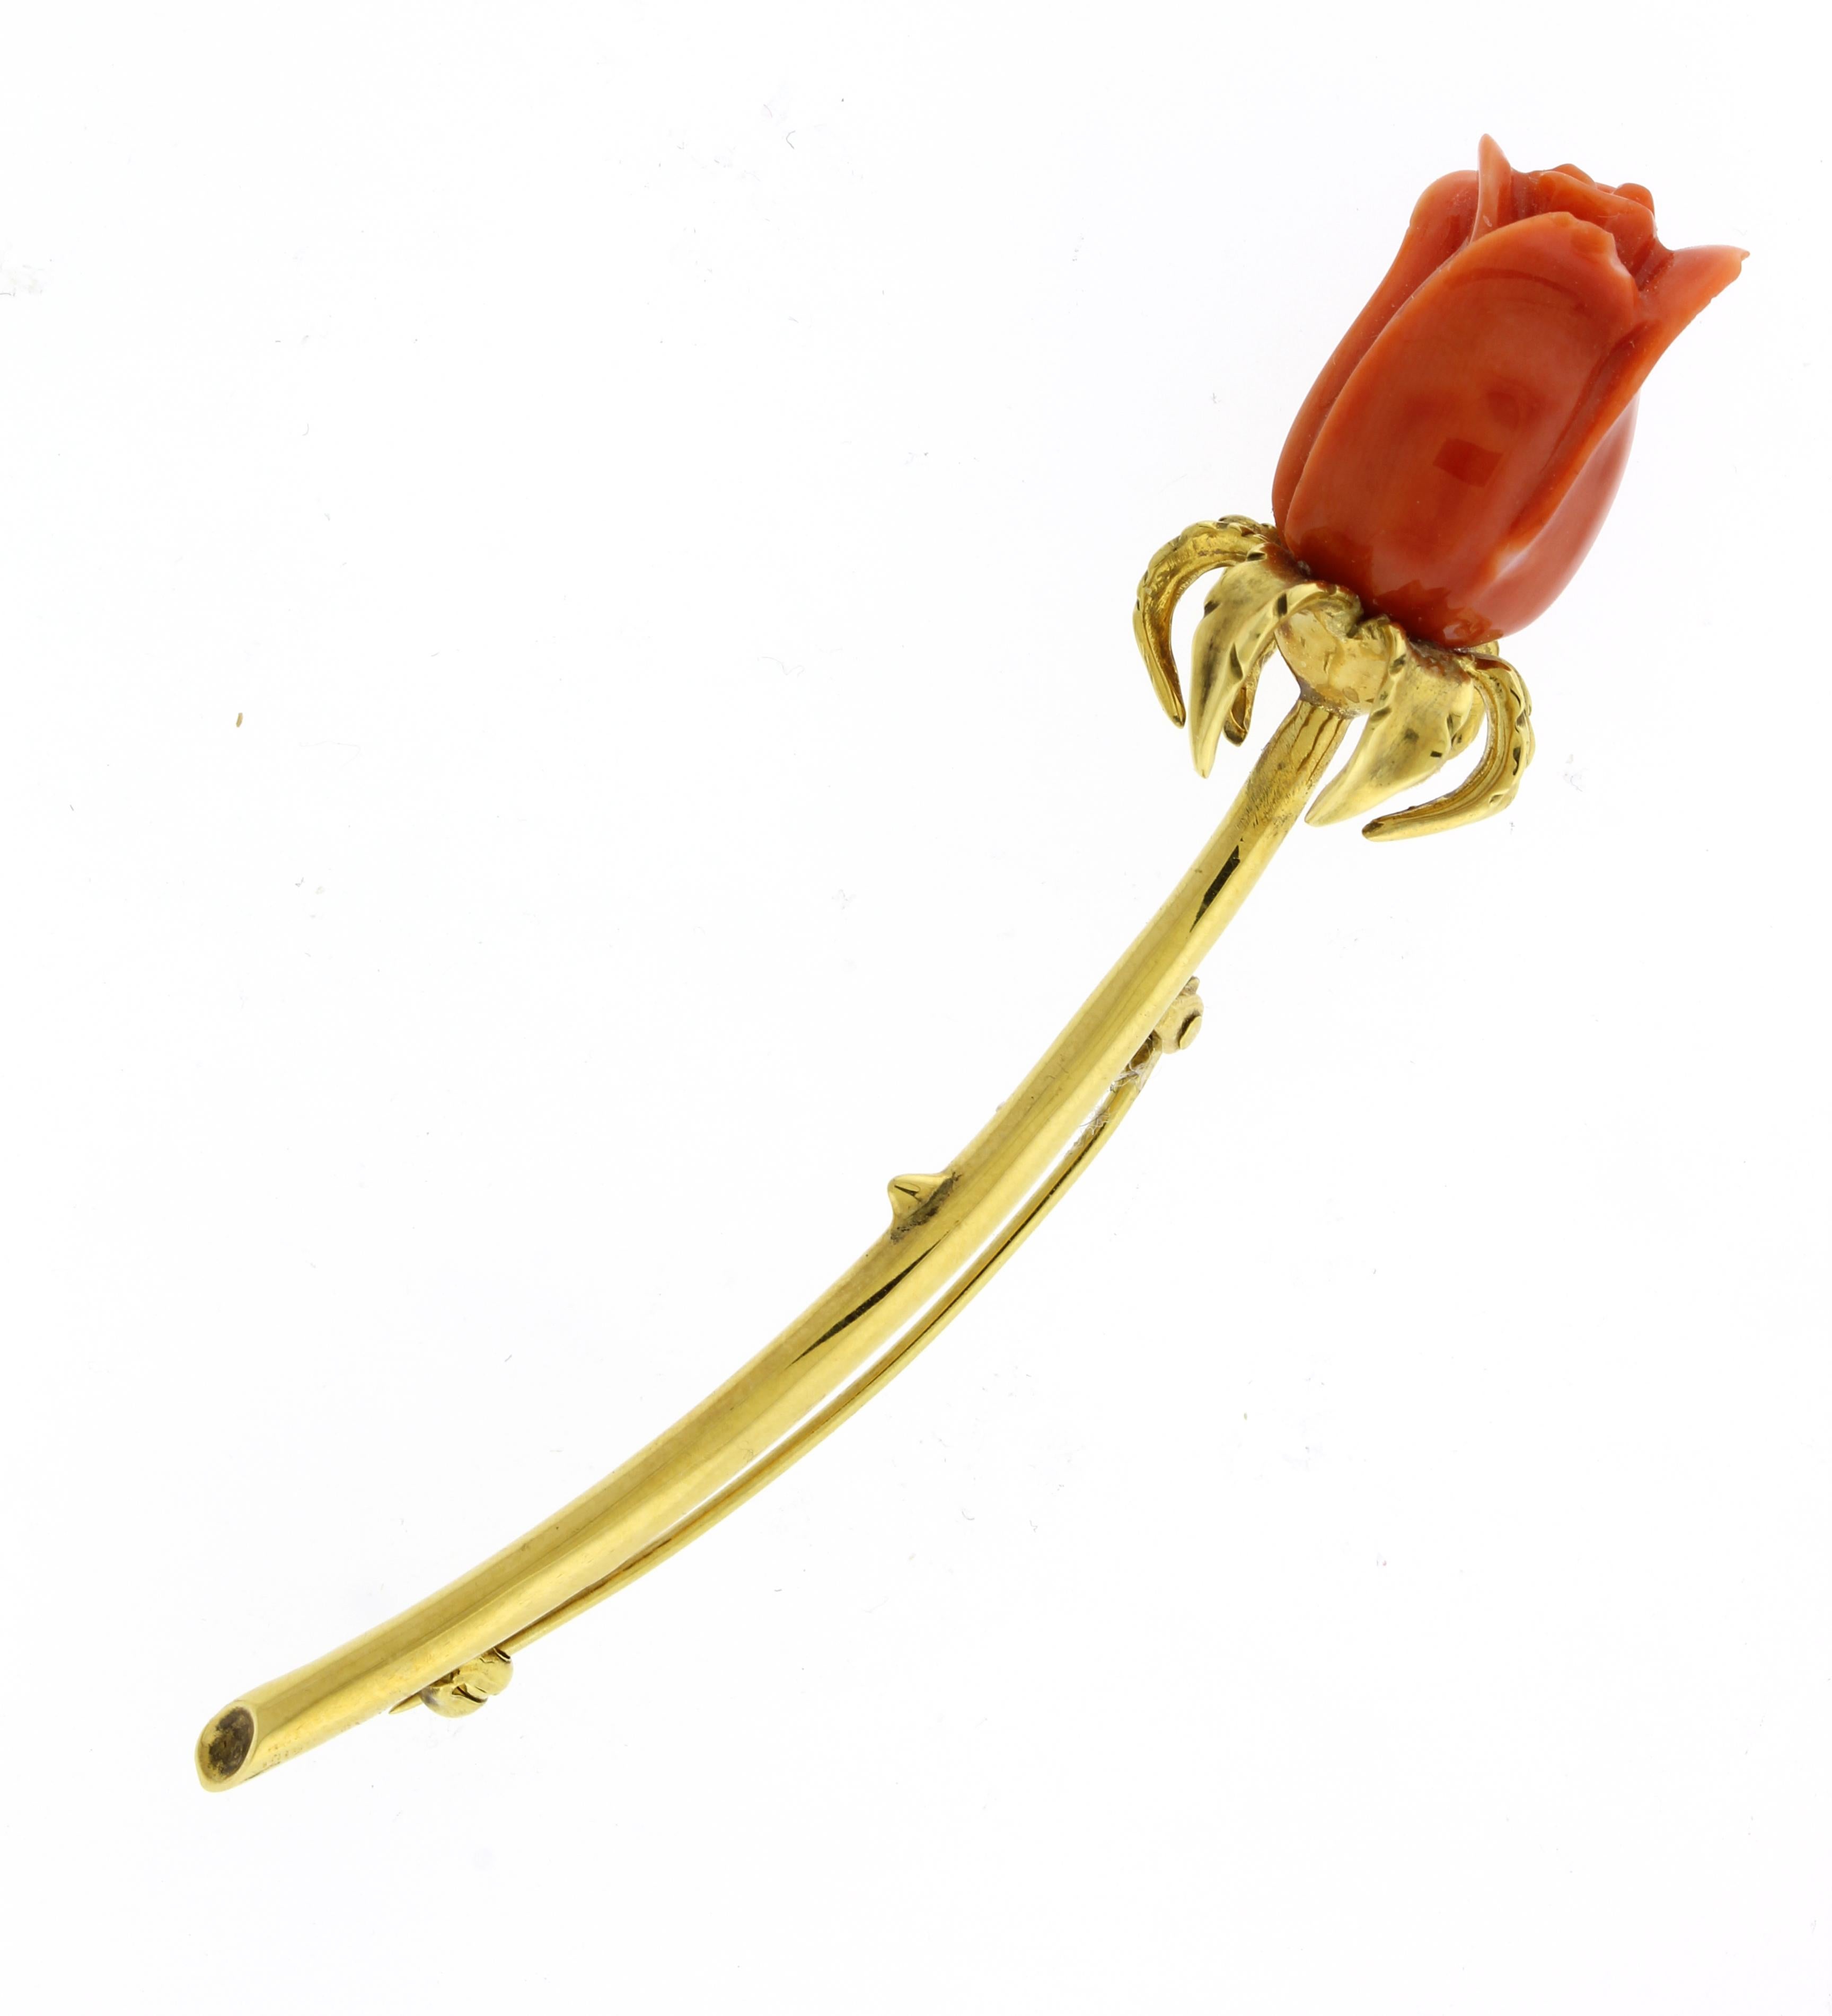 The coral was hand carved into a rose to make this elegant flower brooch.  
• Metal: 18kt Yellow Gold
• Designer: Pampillonia Jewelers
• Gemstone: Coral
• Weight: 12.1 grams
• Length: 3 inches
• Packaging: Pampillonia Presentation Box
• Condition: